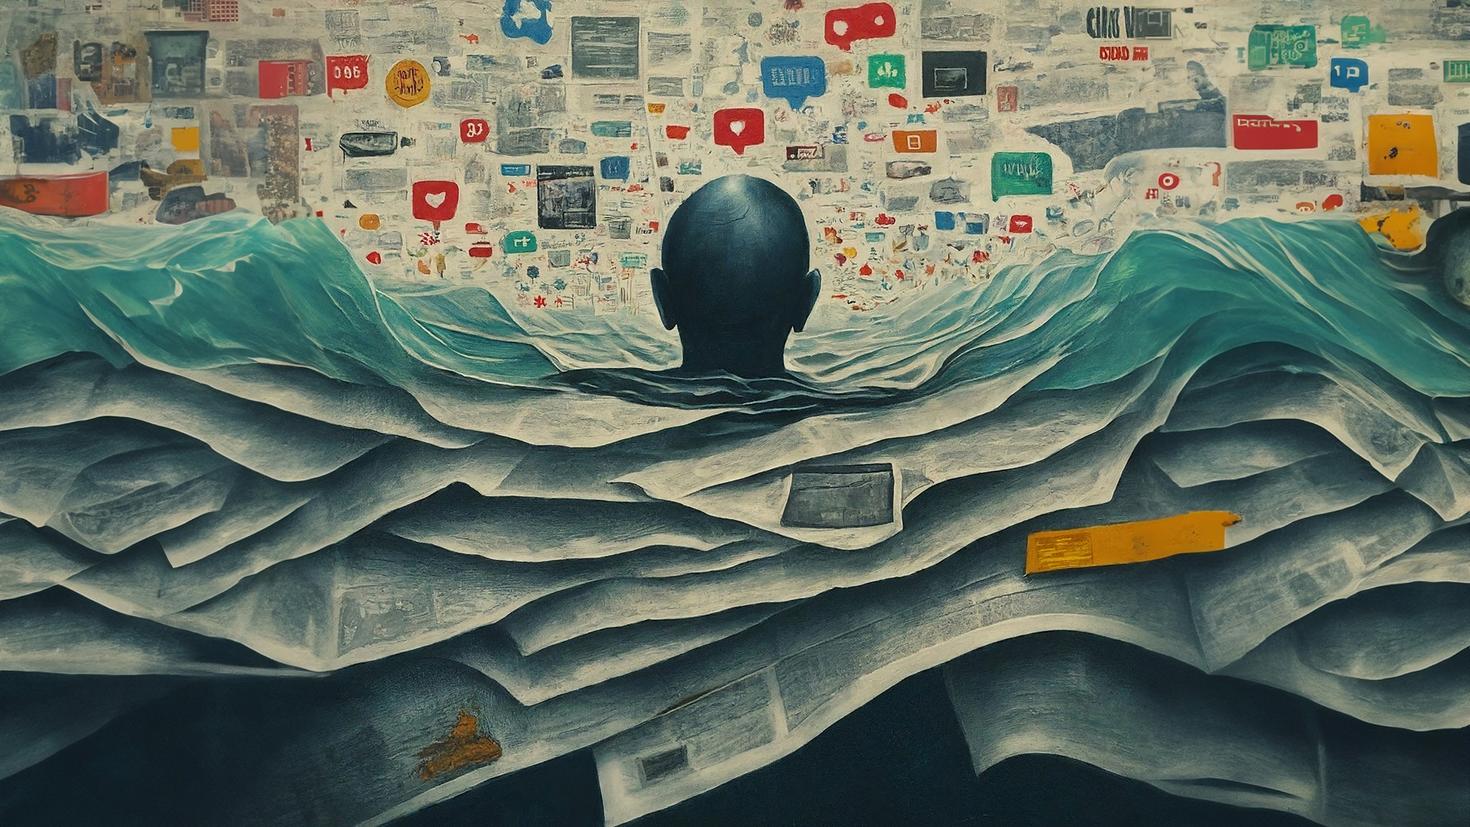 Illustration of a person drowning in a sea of information made of newspapers.